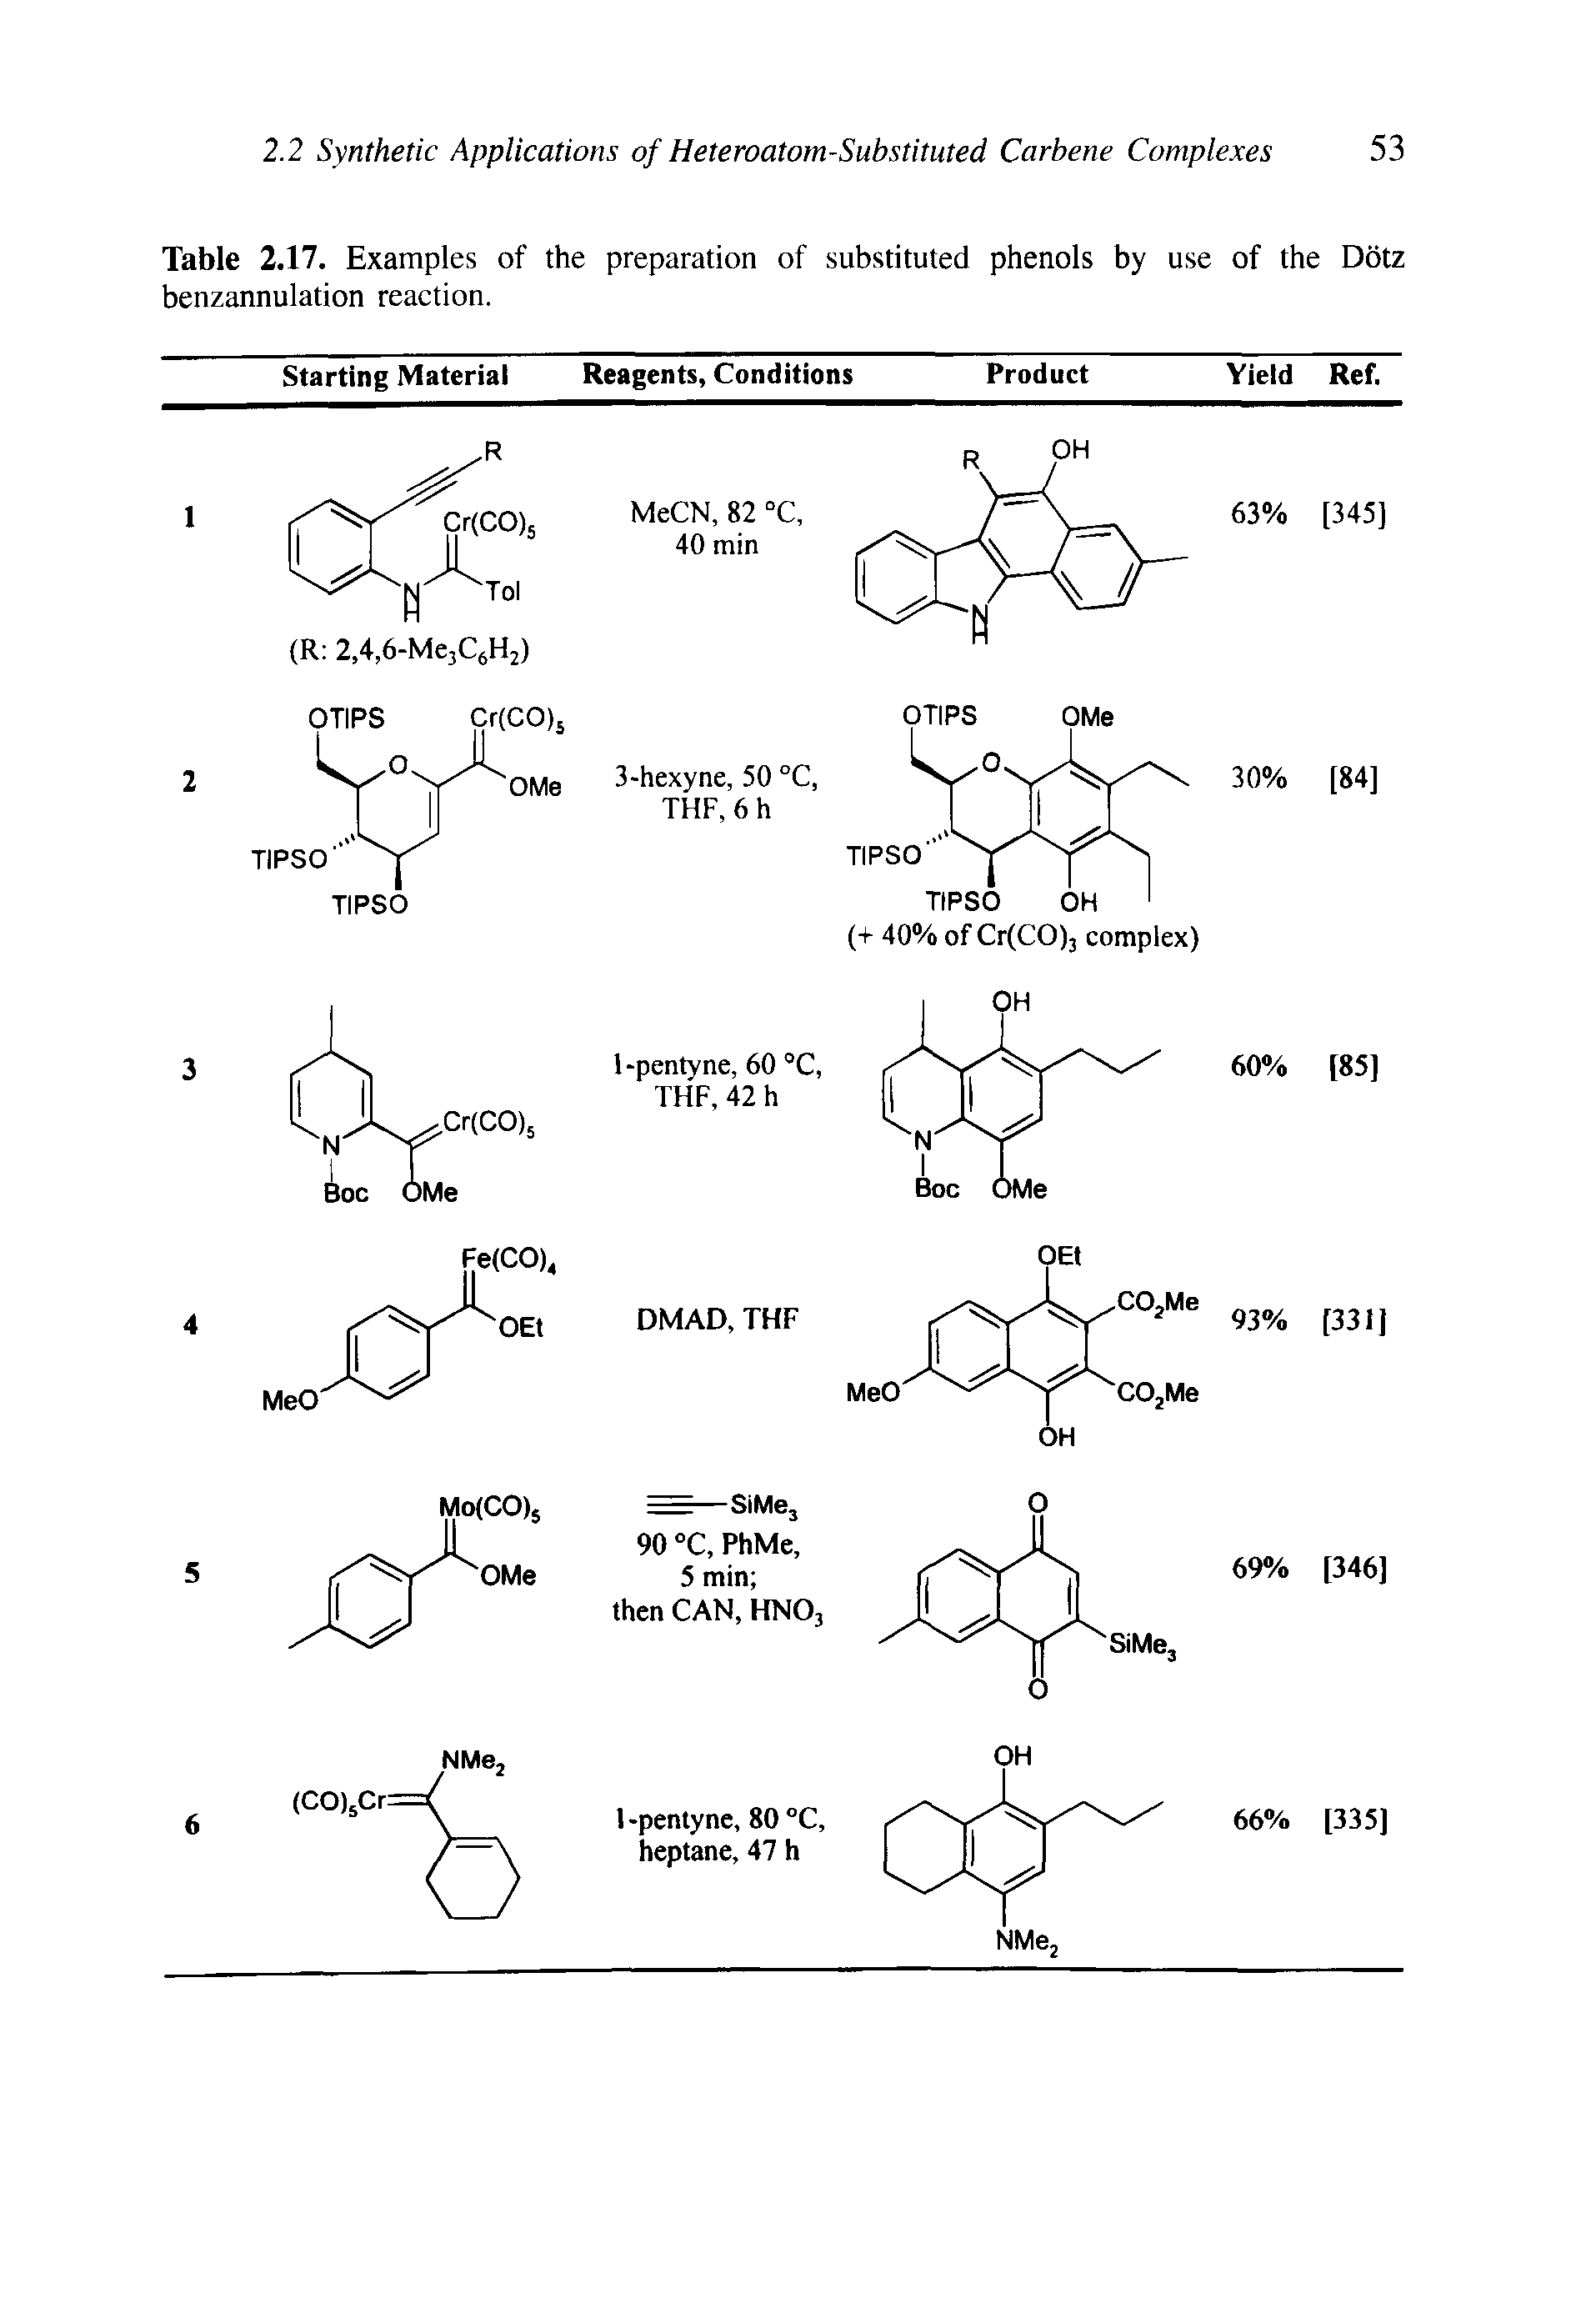 Table 2.17. Examples of the preparation of substituted phenols by use of the Dotz benzannulation reaction.